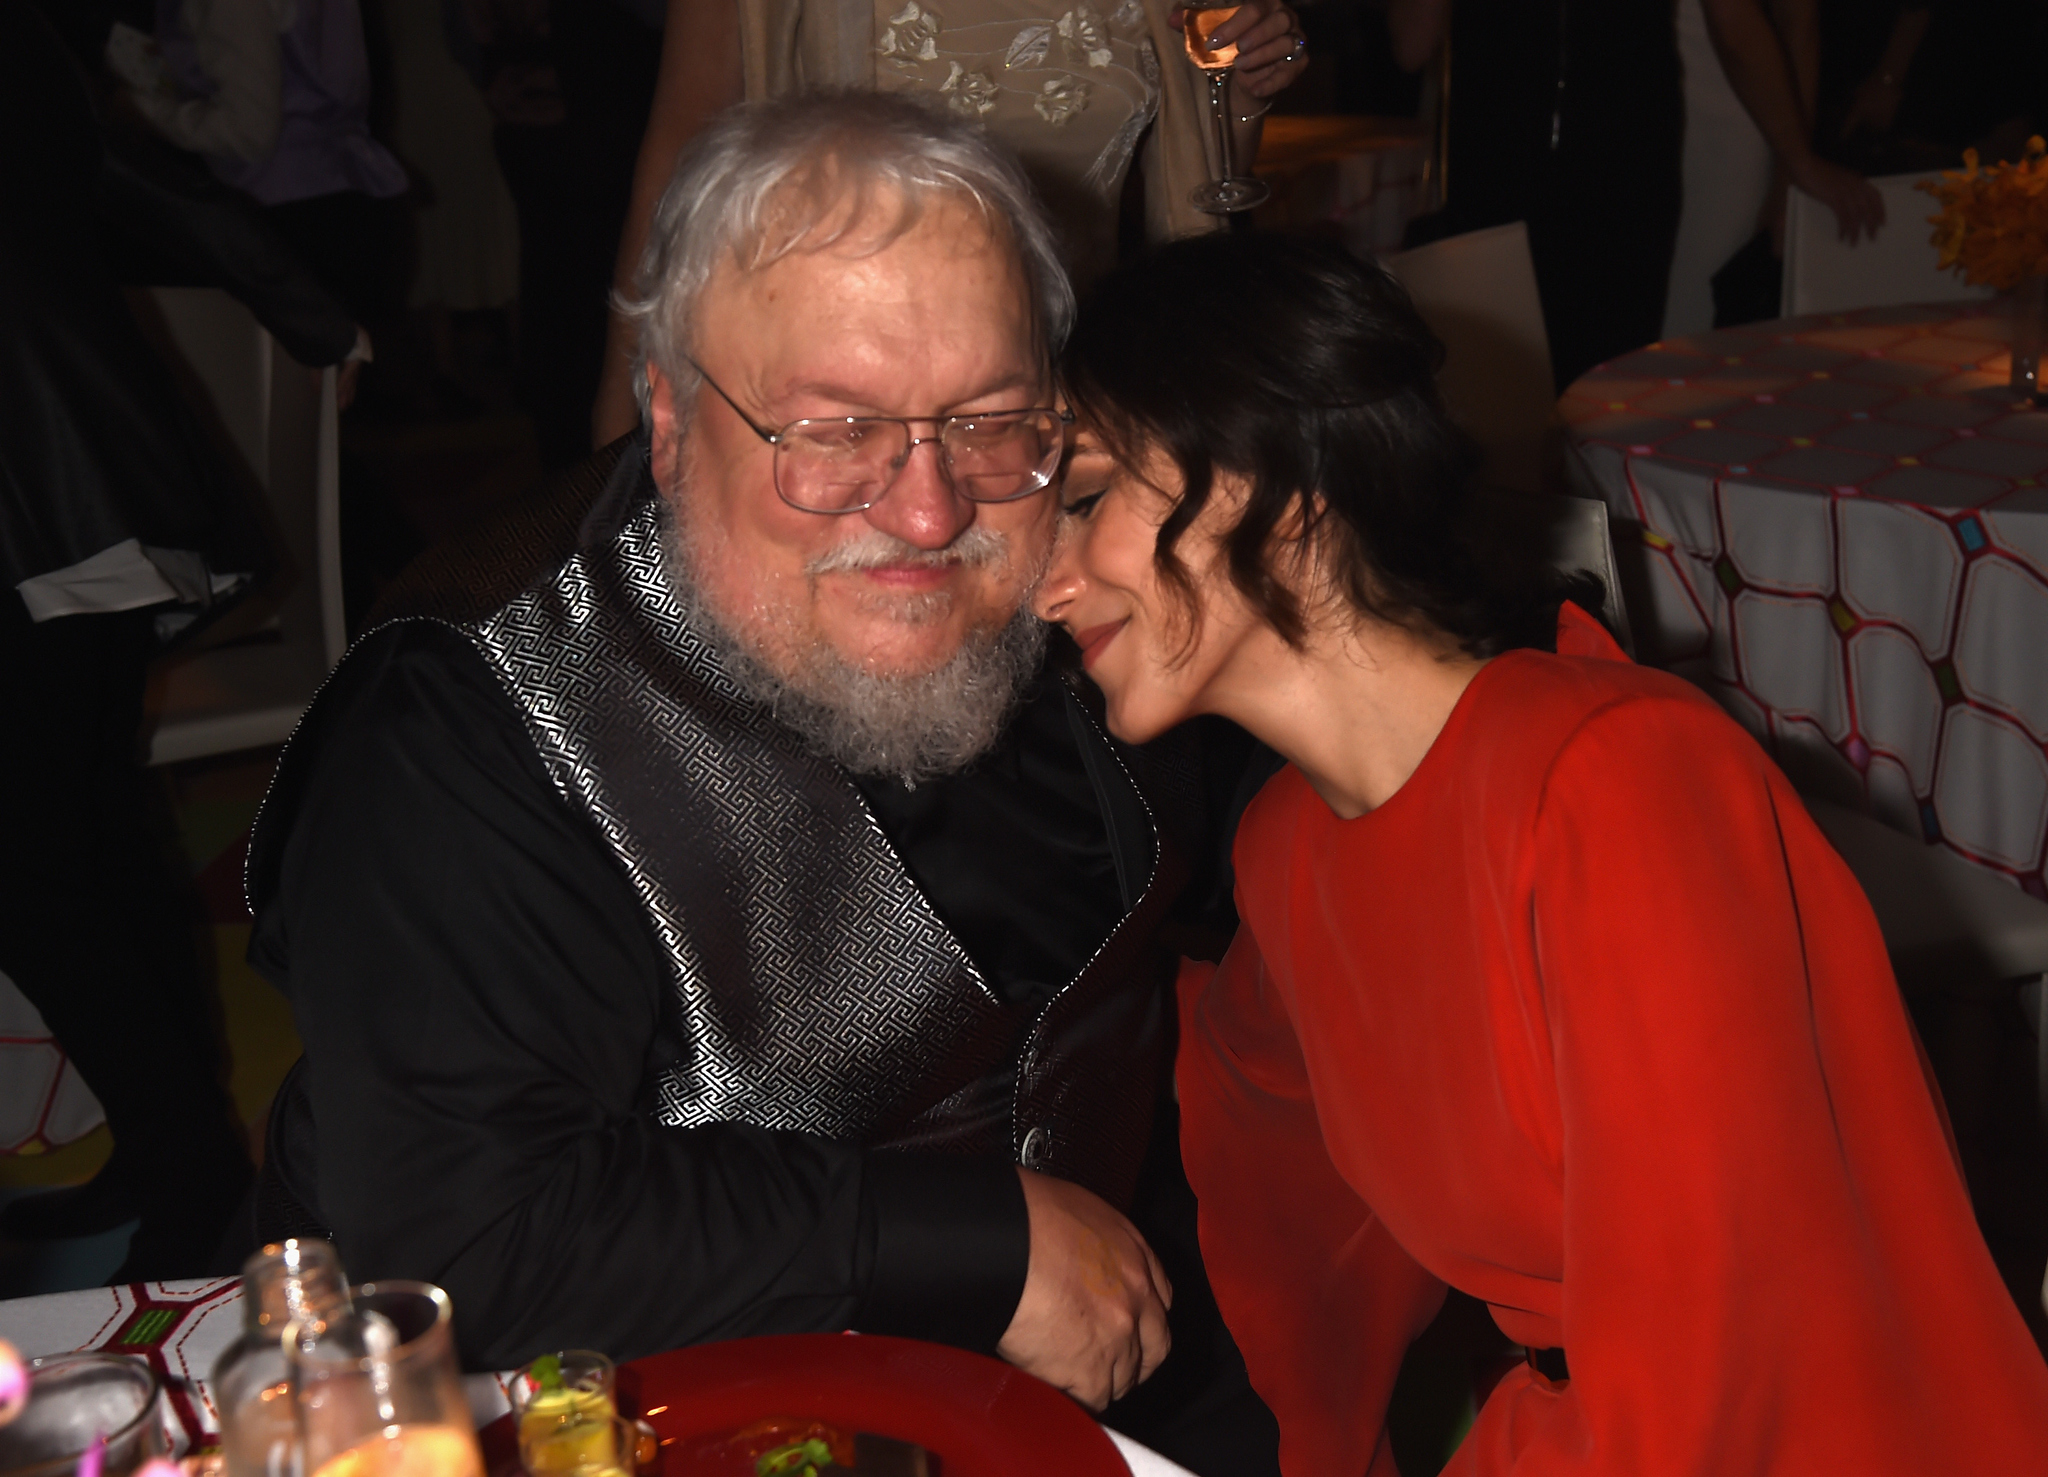 George R.R. Martin and Sibel Kekilli at event of The 66th Primetime Emmy Awards (2014)